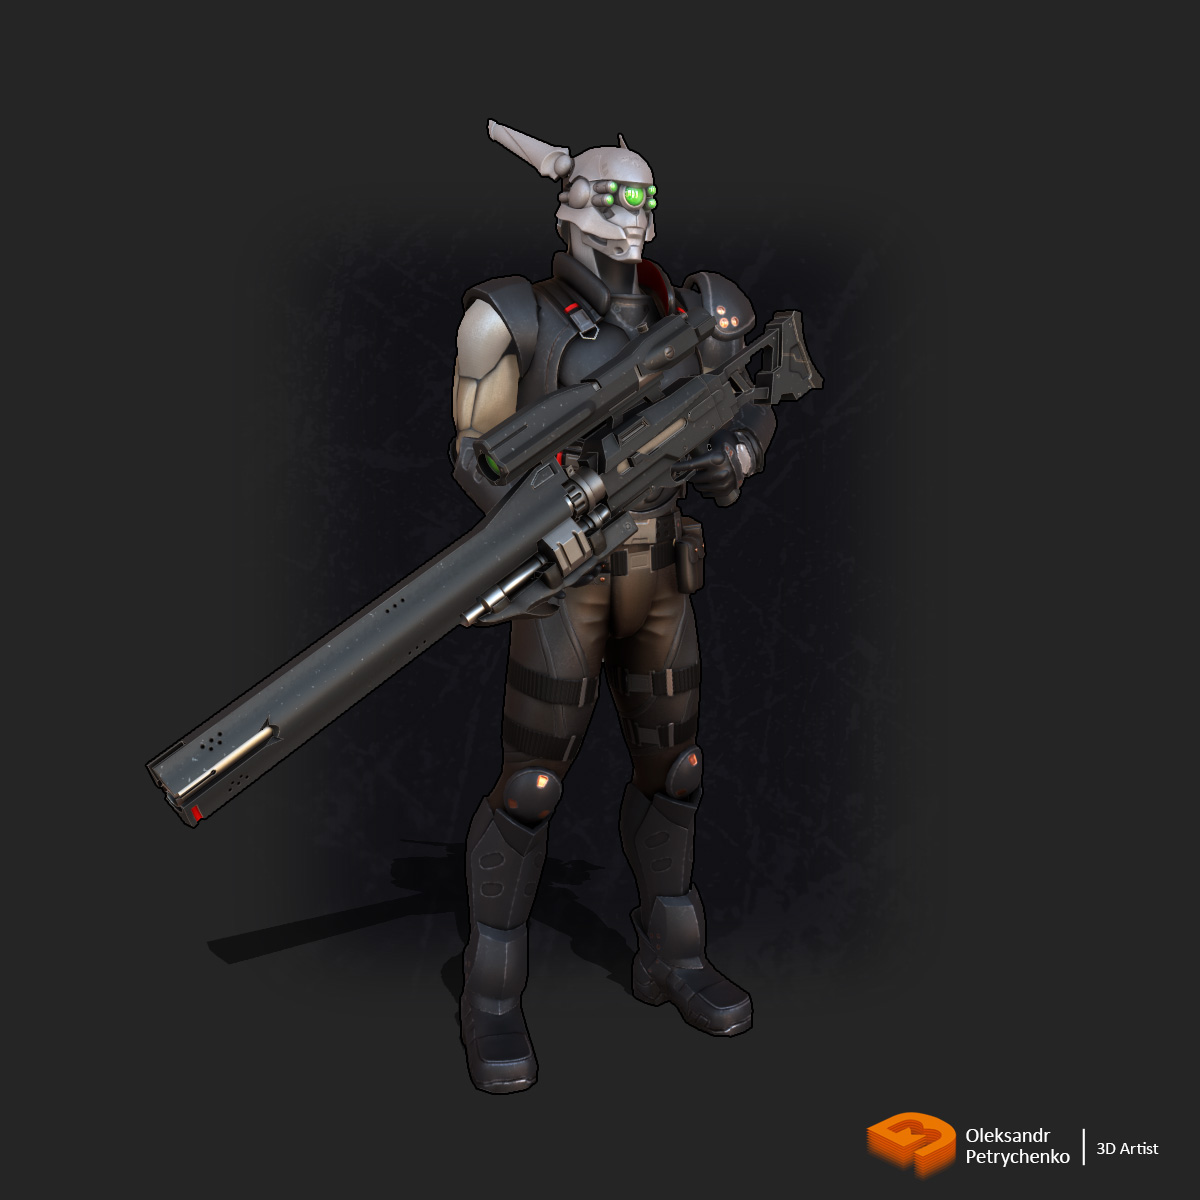 Briareos Character 3D Appleseed exmachina